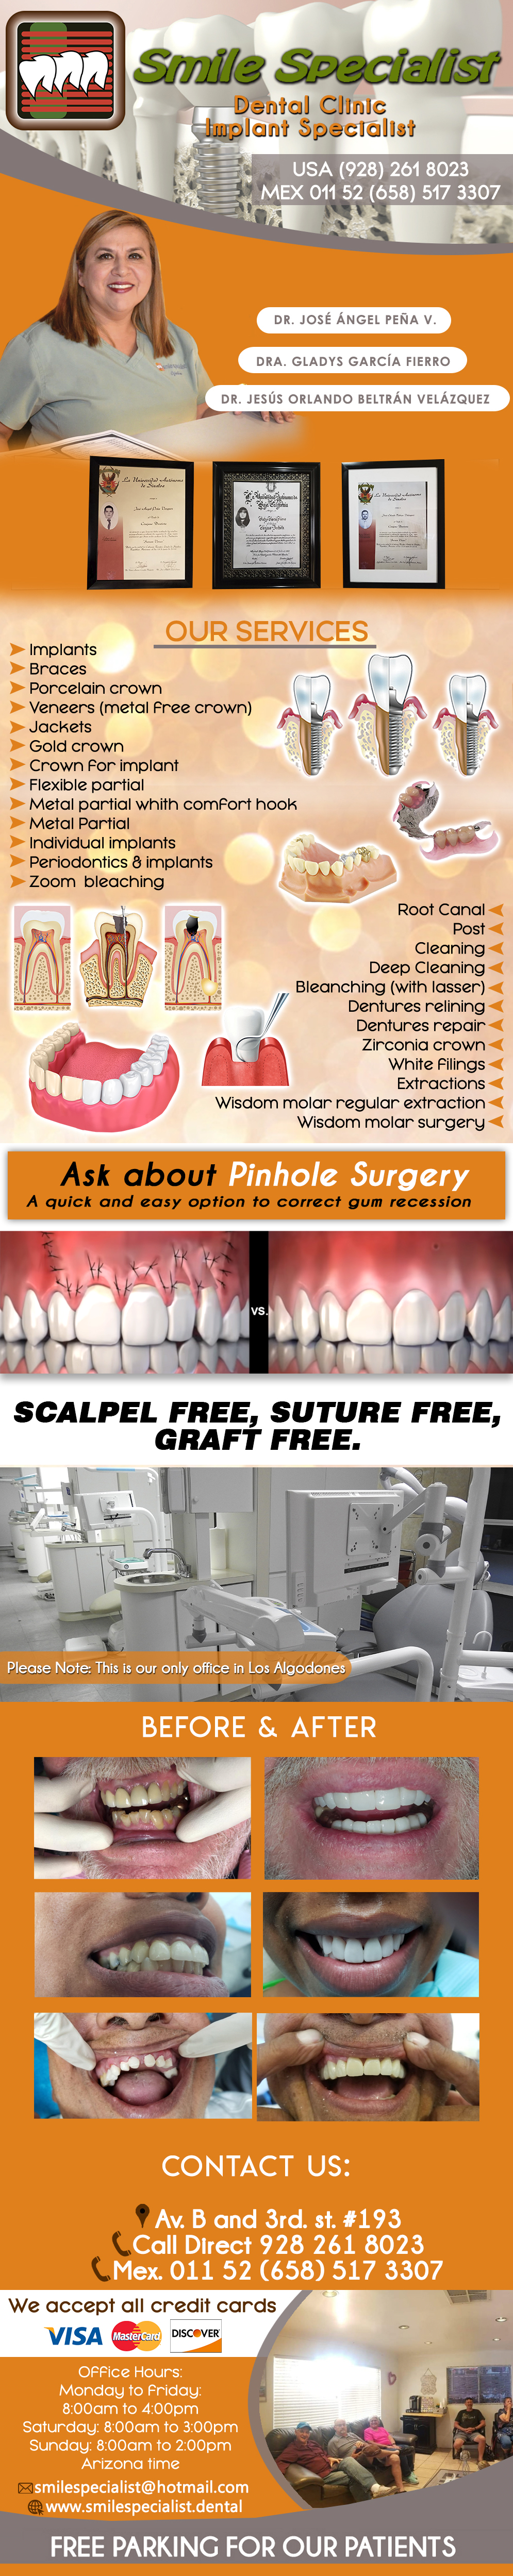 Smile Specialist -Porcelain crown
Veneers (metal free crown)
Jackets
Gold crown
Crown for implant
Flexible partial
Metal partial whith comfort hook
Metal partial
Extractions
Wisdom molar regular extraction
Wisdom molar surgery
Cleaning
Deep Cleaning
Bleanching (with lasser)
Dentures (full set)
Dentures with porcelain teet
Dentures (upper or lower)
Dentures relining
Dentures with mollo
Dentures repair
Lower mini implants
Upper mini implants
White filings
Individual Implants
Braces
Root Canal
Post
Periodontics & Implants
                                    